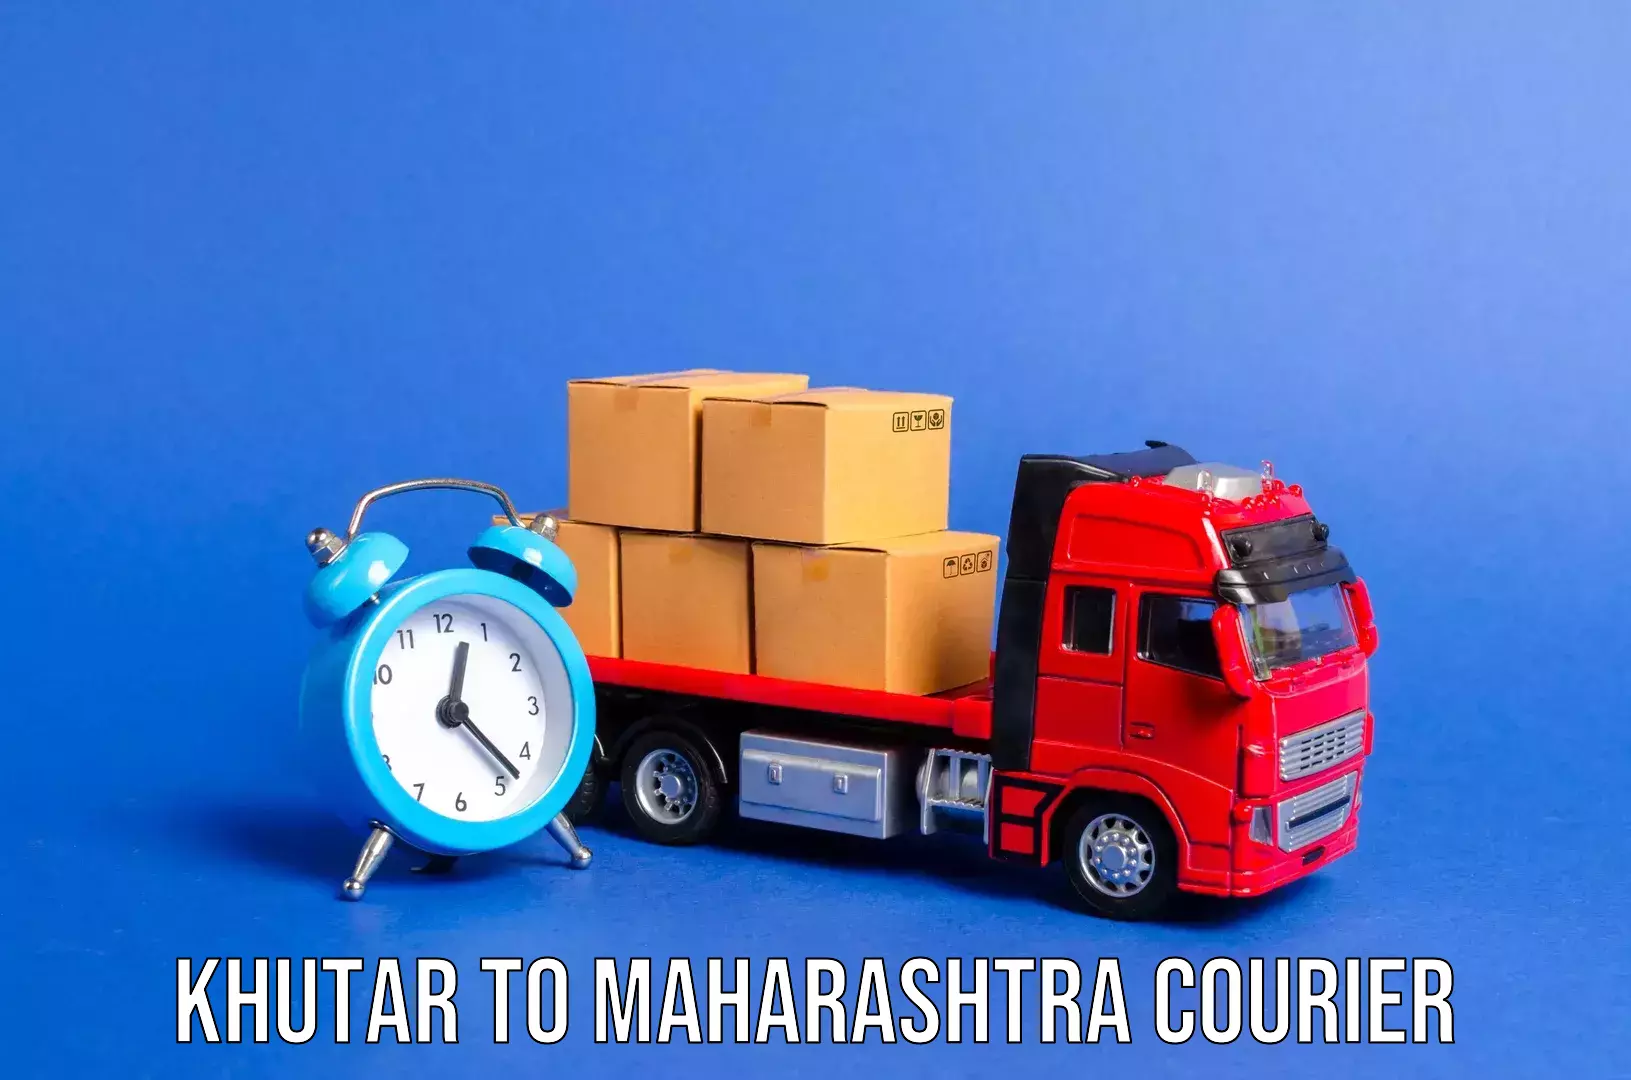 Online luggage shipping booking in Khutar to Maharashtra